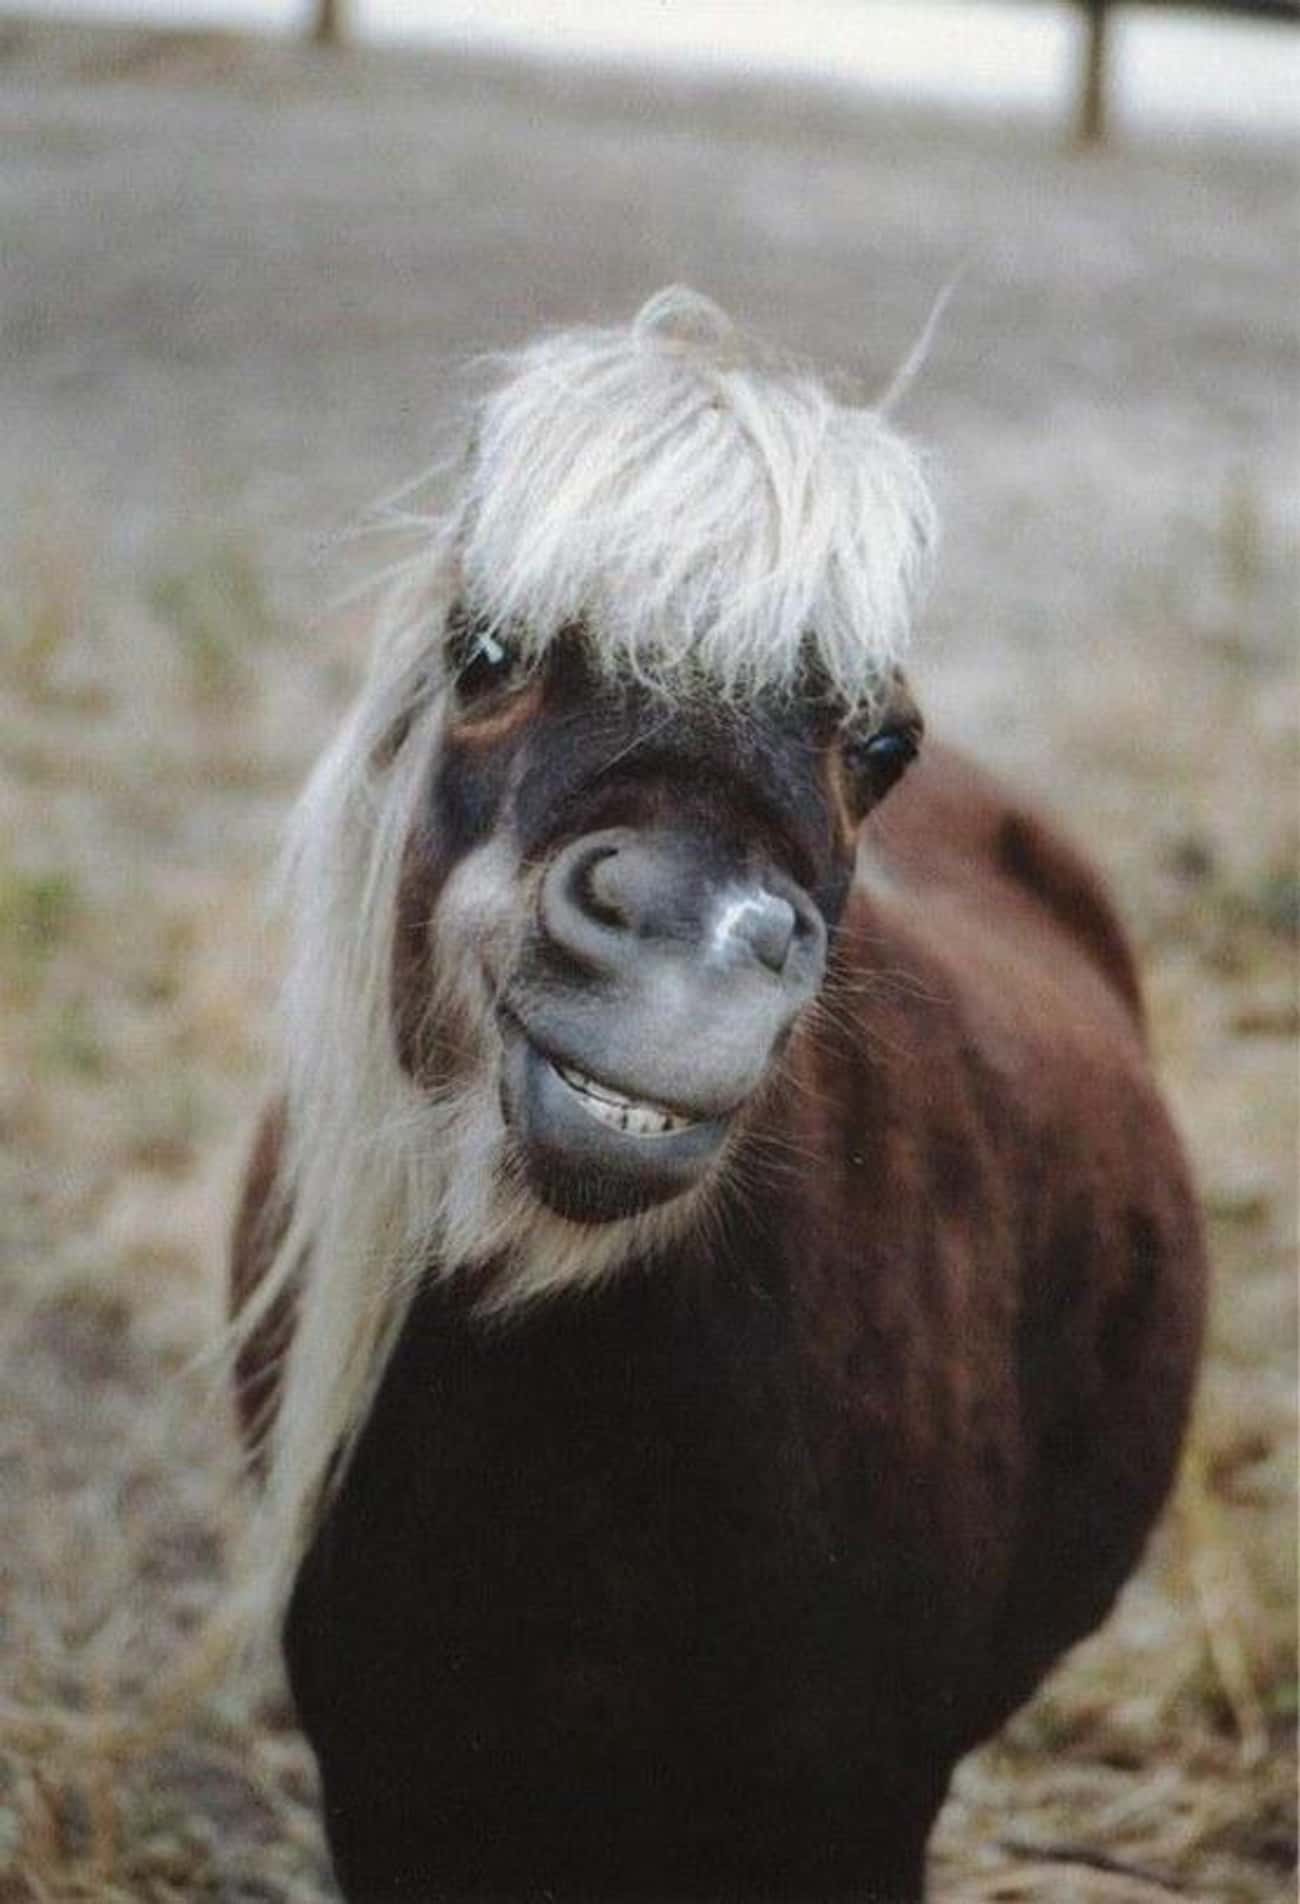 This Smiling Pony